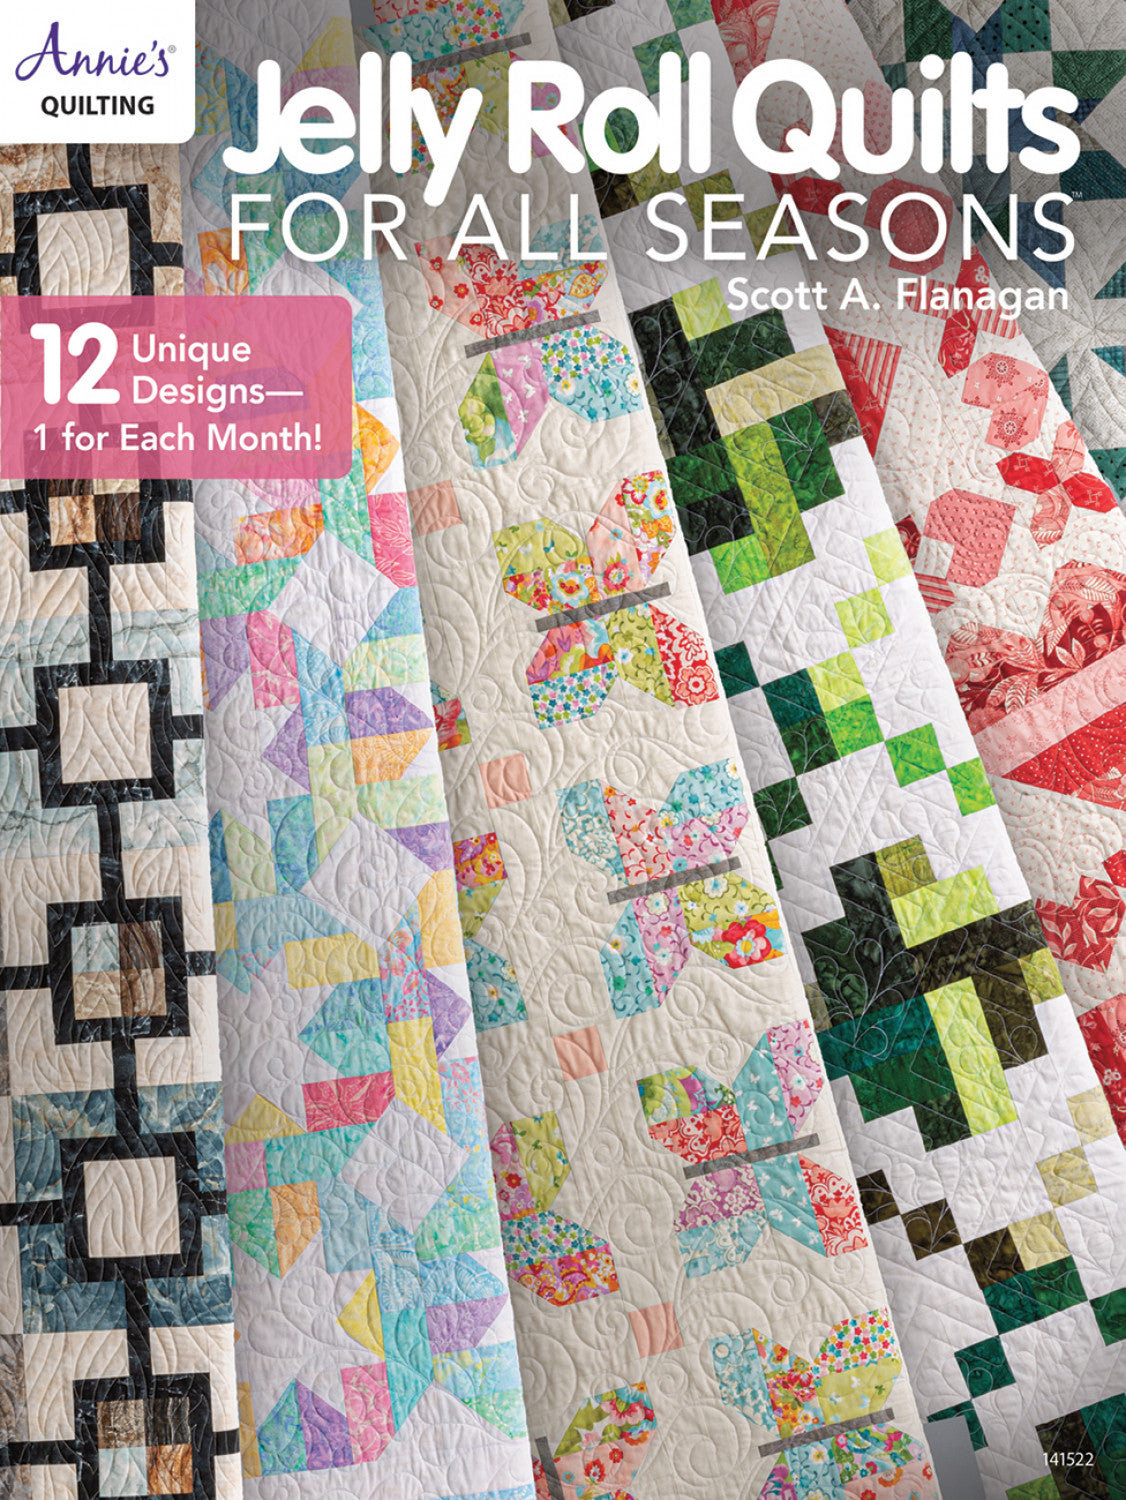 Jelly Roll Quilts for all Seasone - Scott A. Flanagan